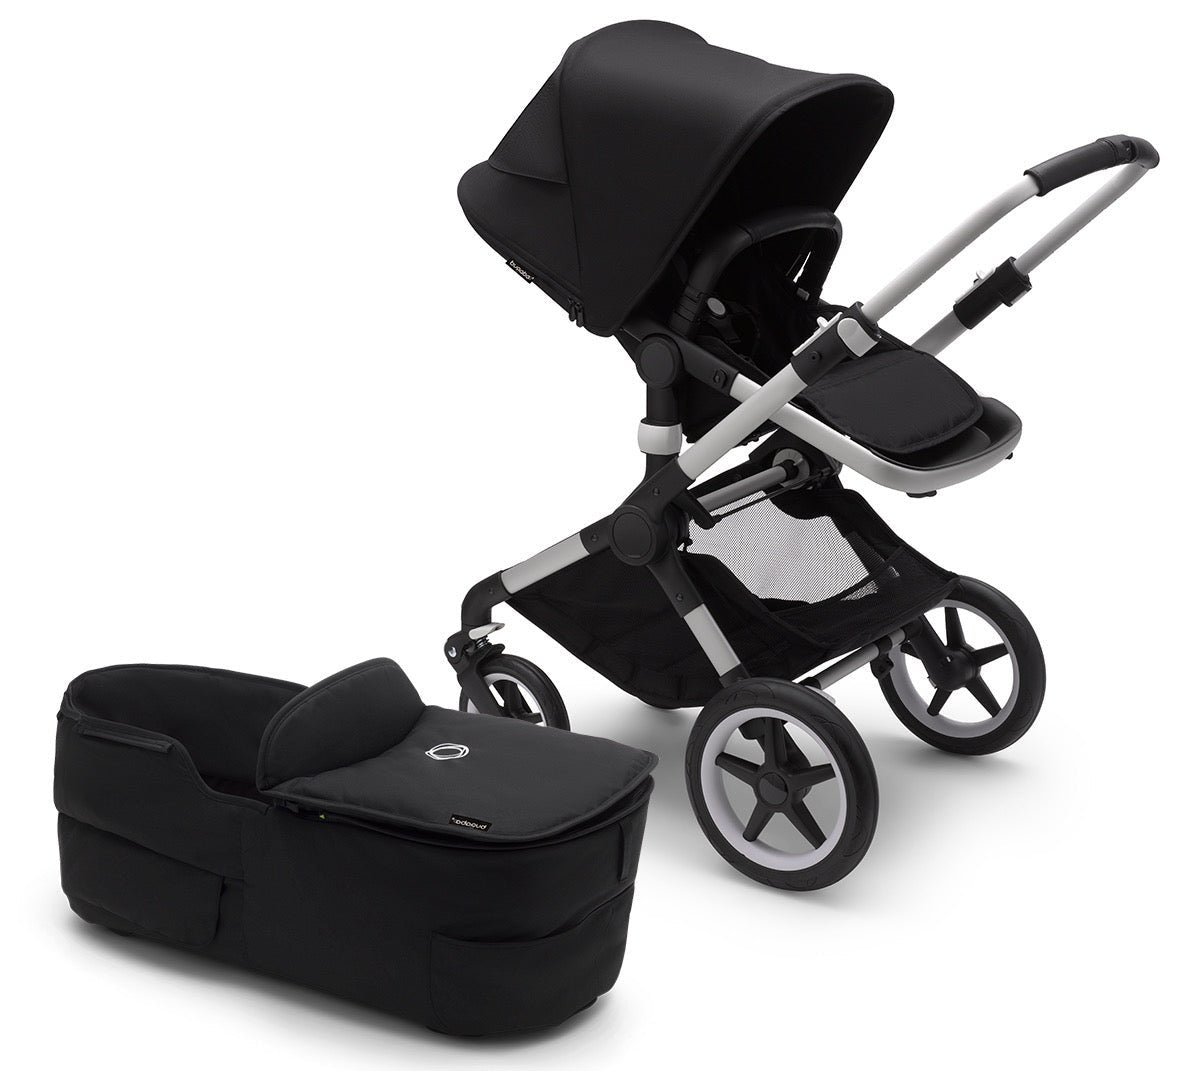 Bugaboo Fox 3: What to know before buying